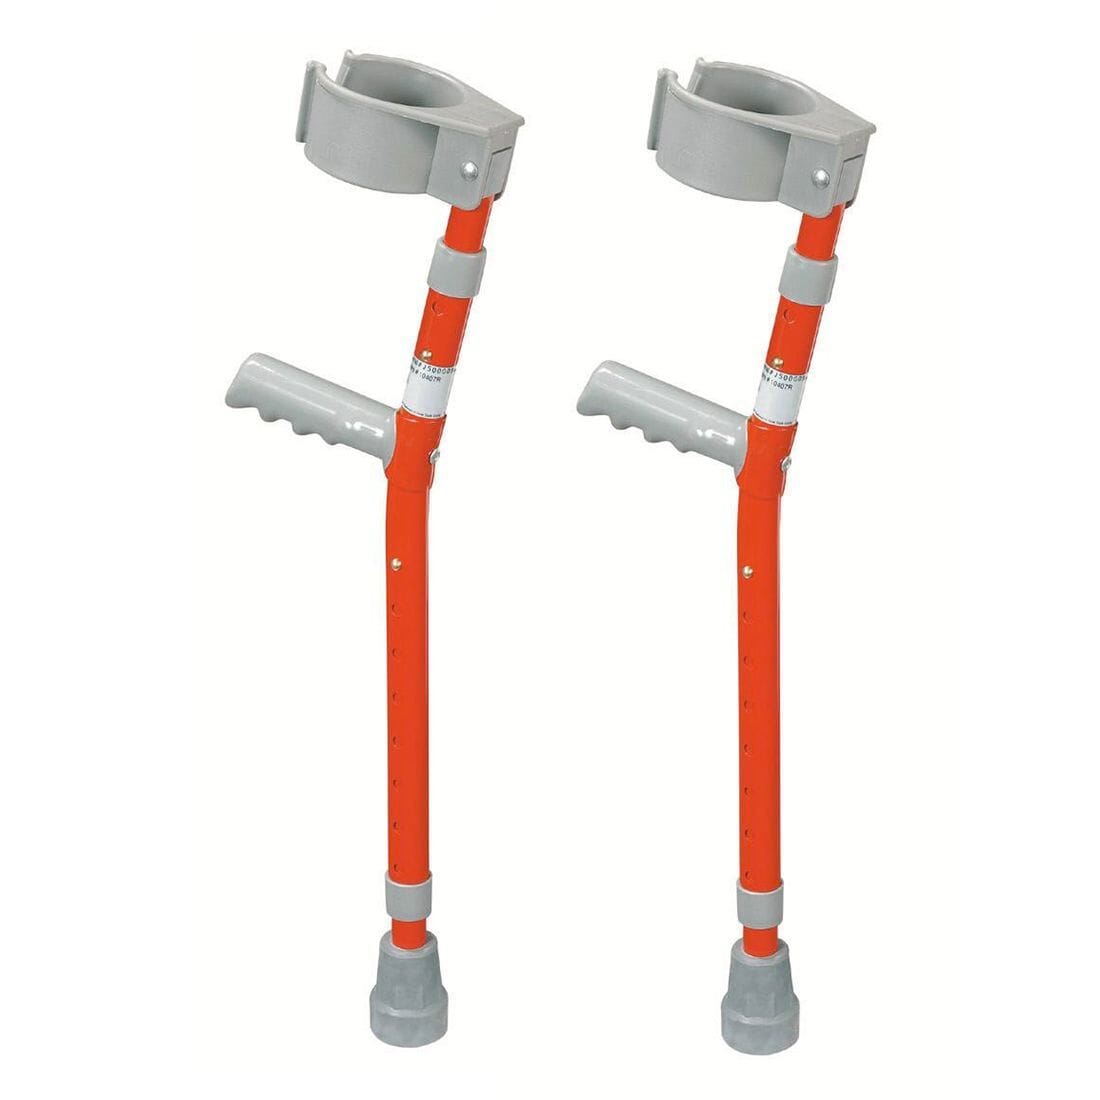 View Paediatric Crutches for Children information